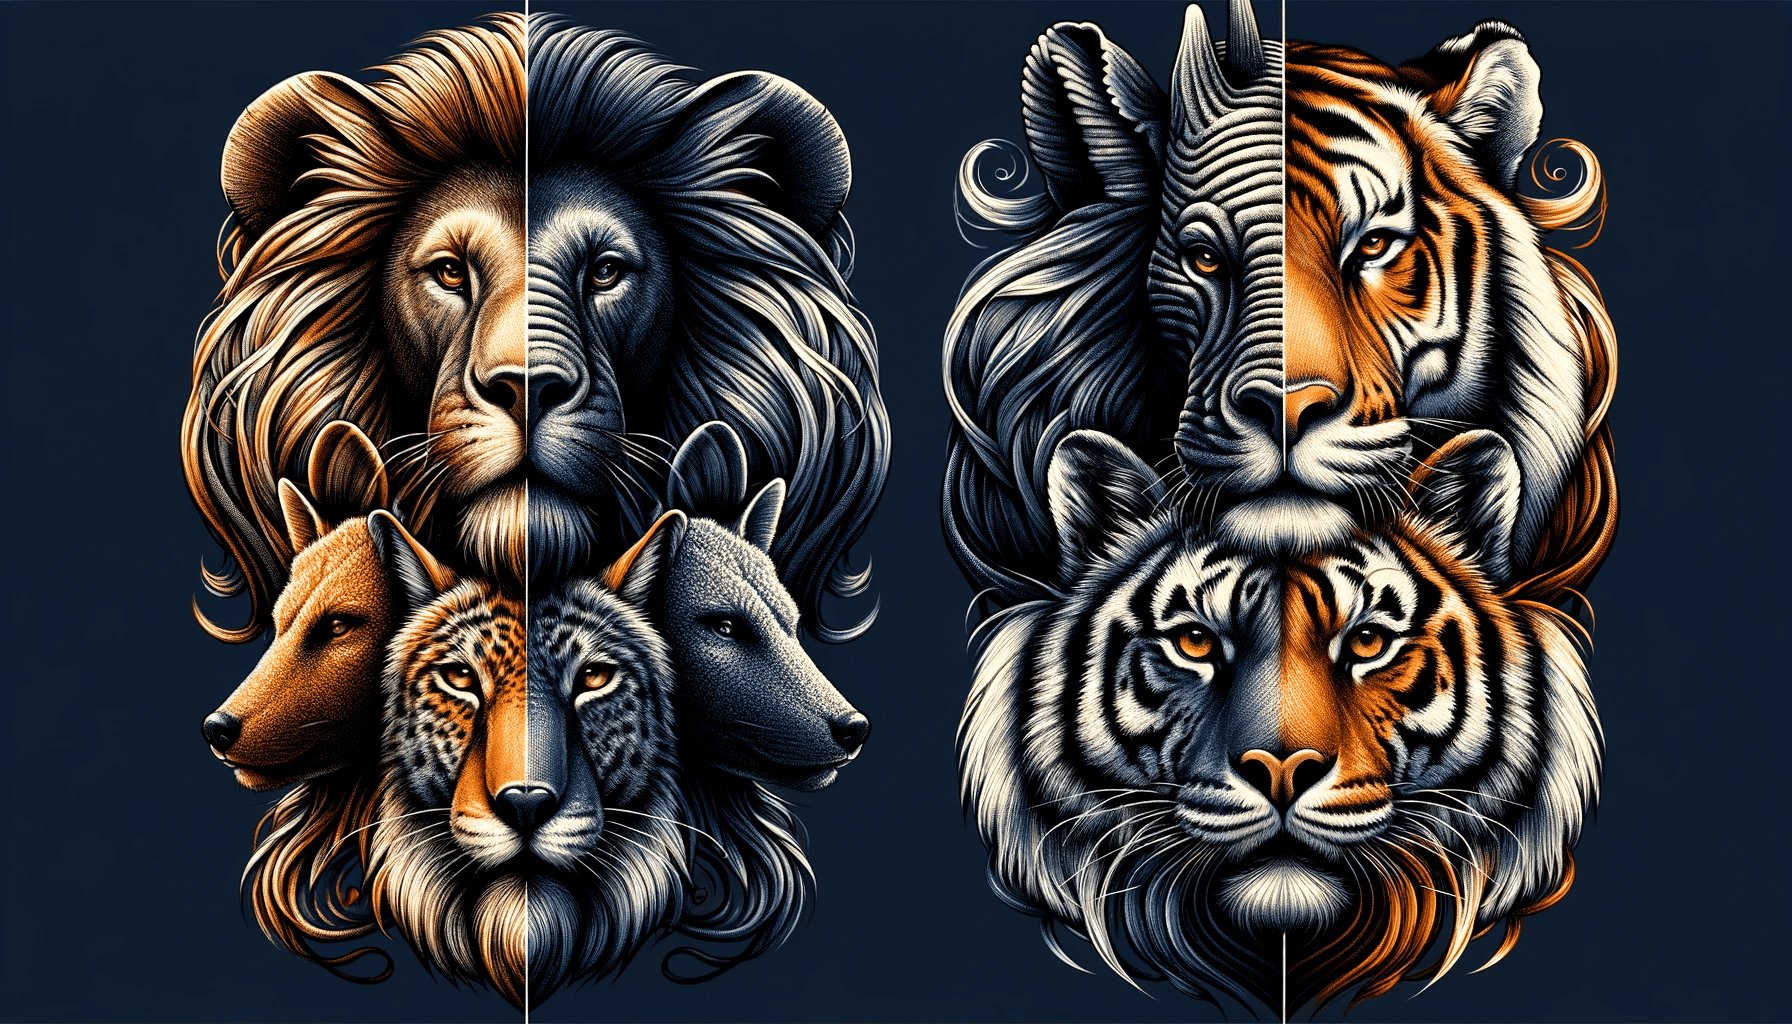 Stand Out with These 10 Unique Animal Portrait T-Shirt Designs - PET SKETCH STUDIO